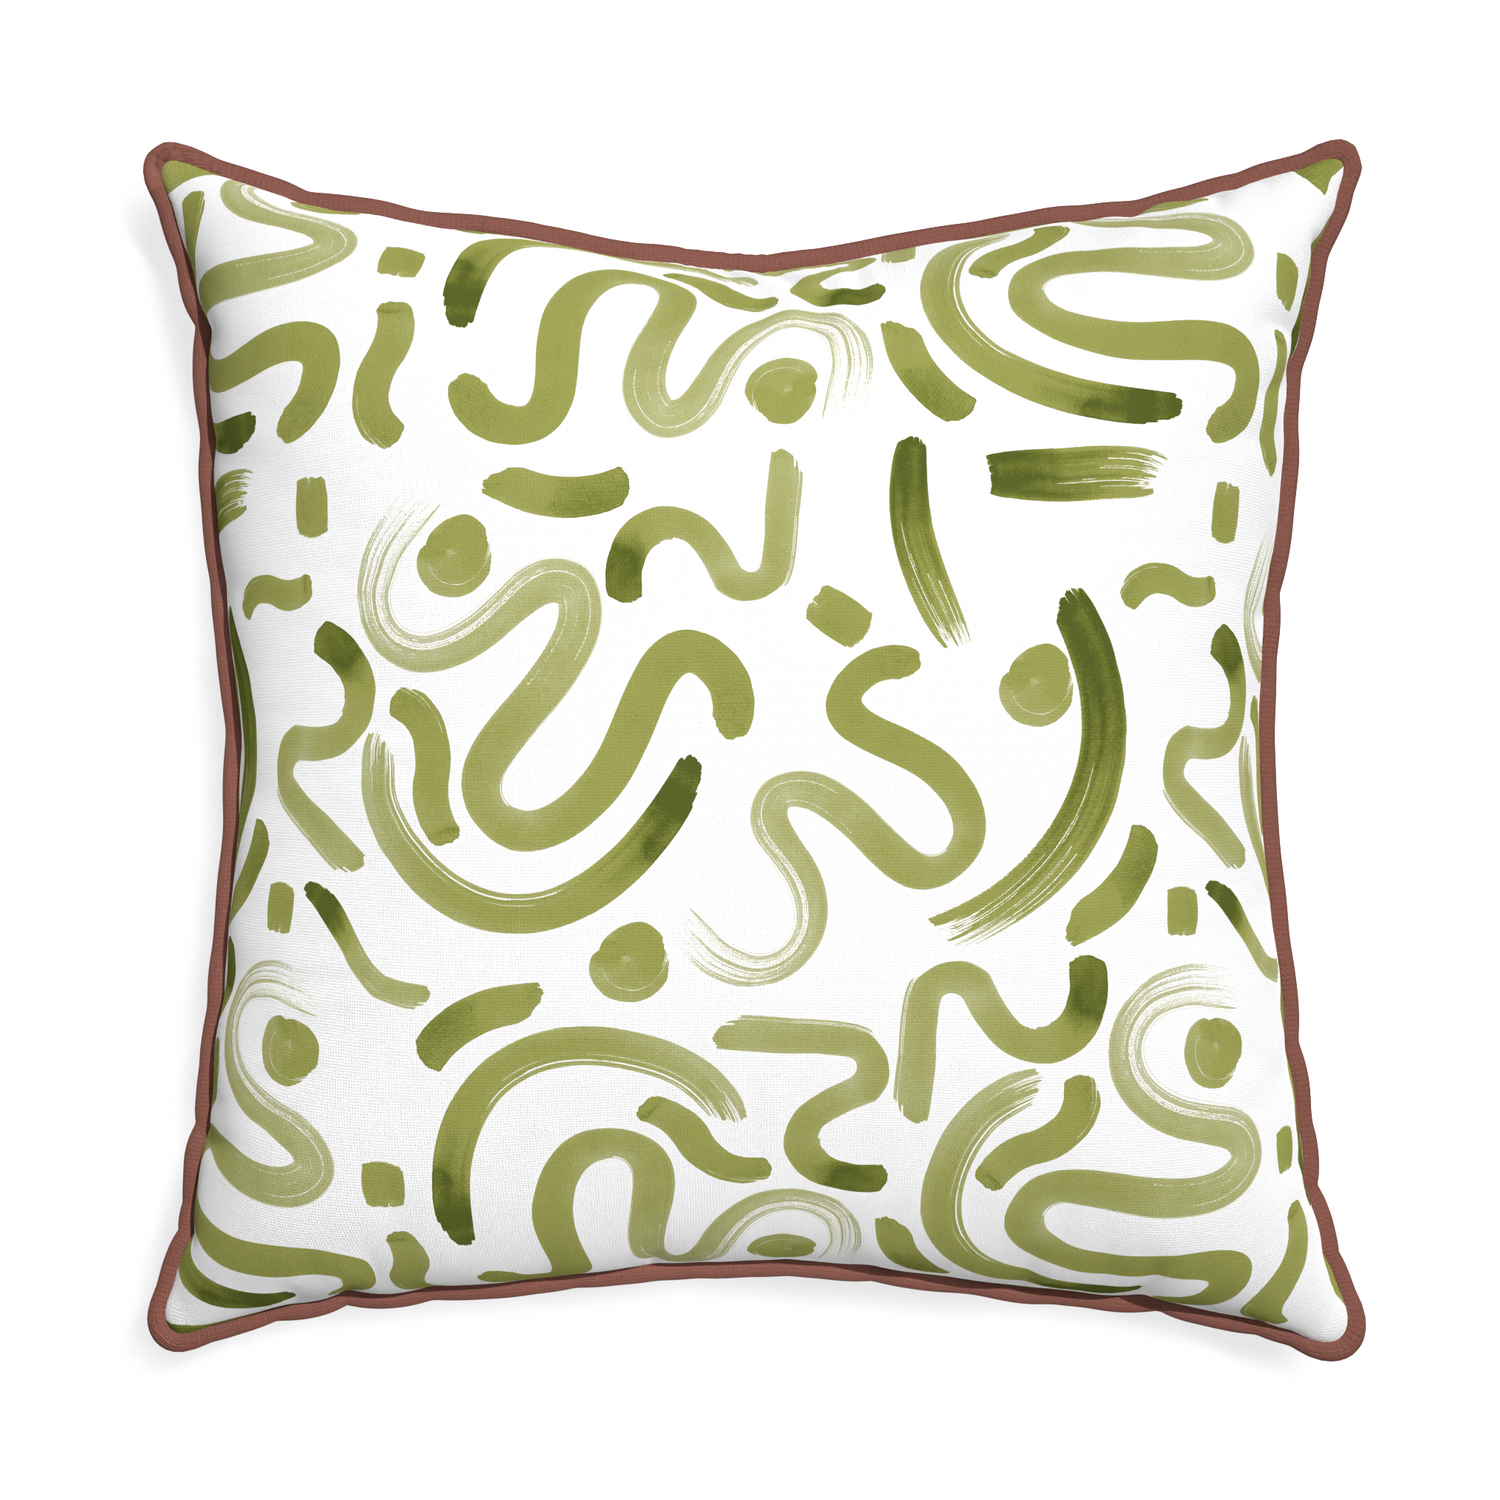 Euro-sham hockney moss custom moss greenpillow with w piping on white background